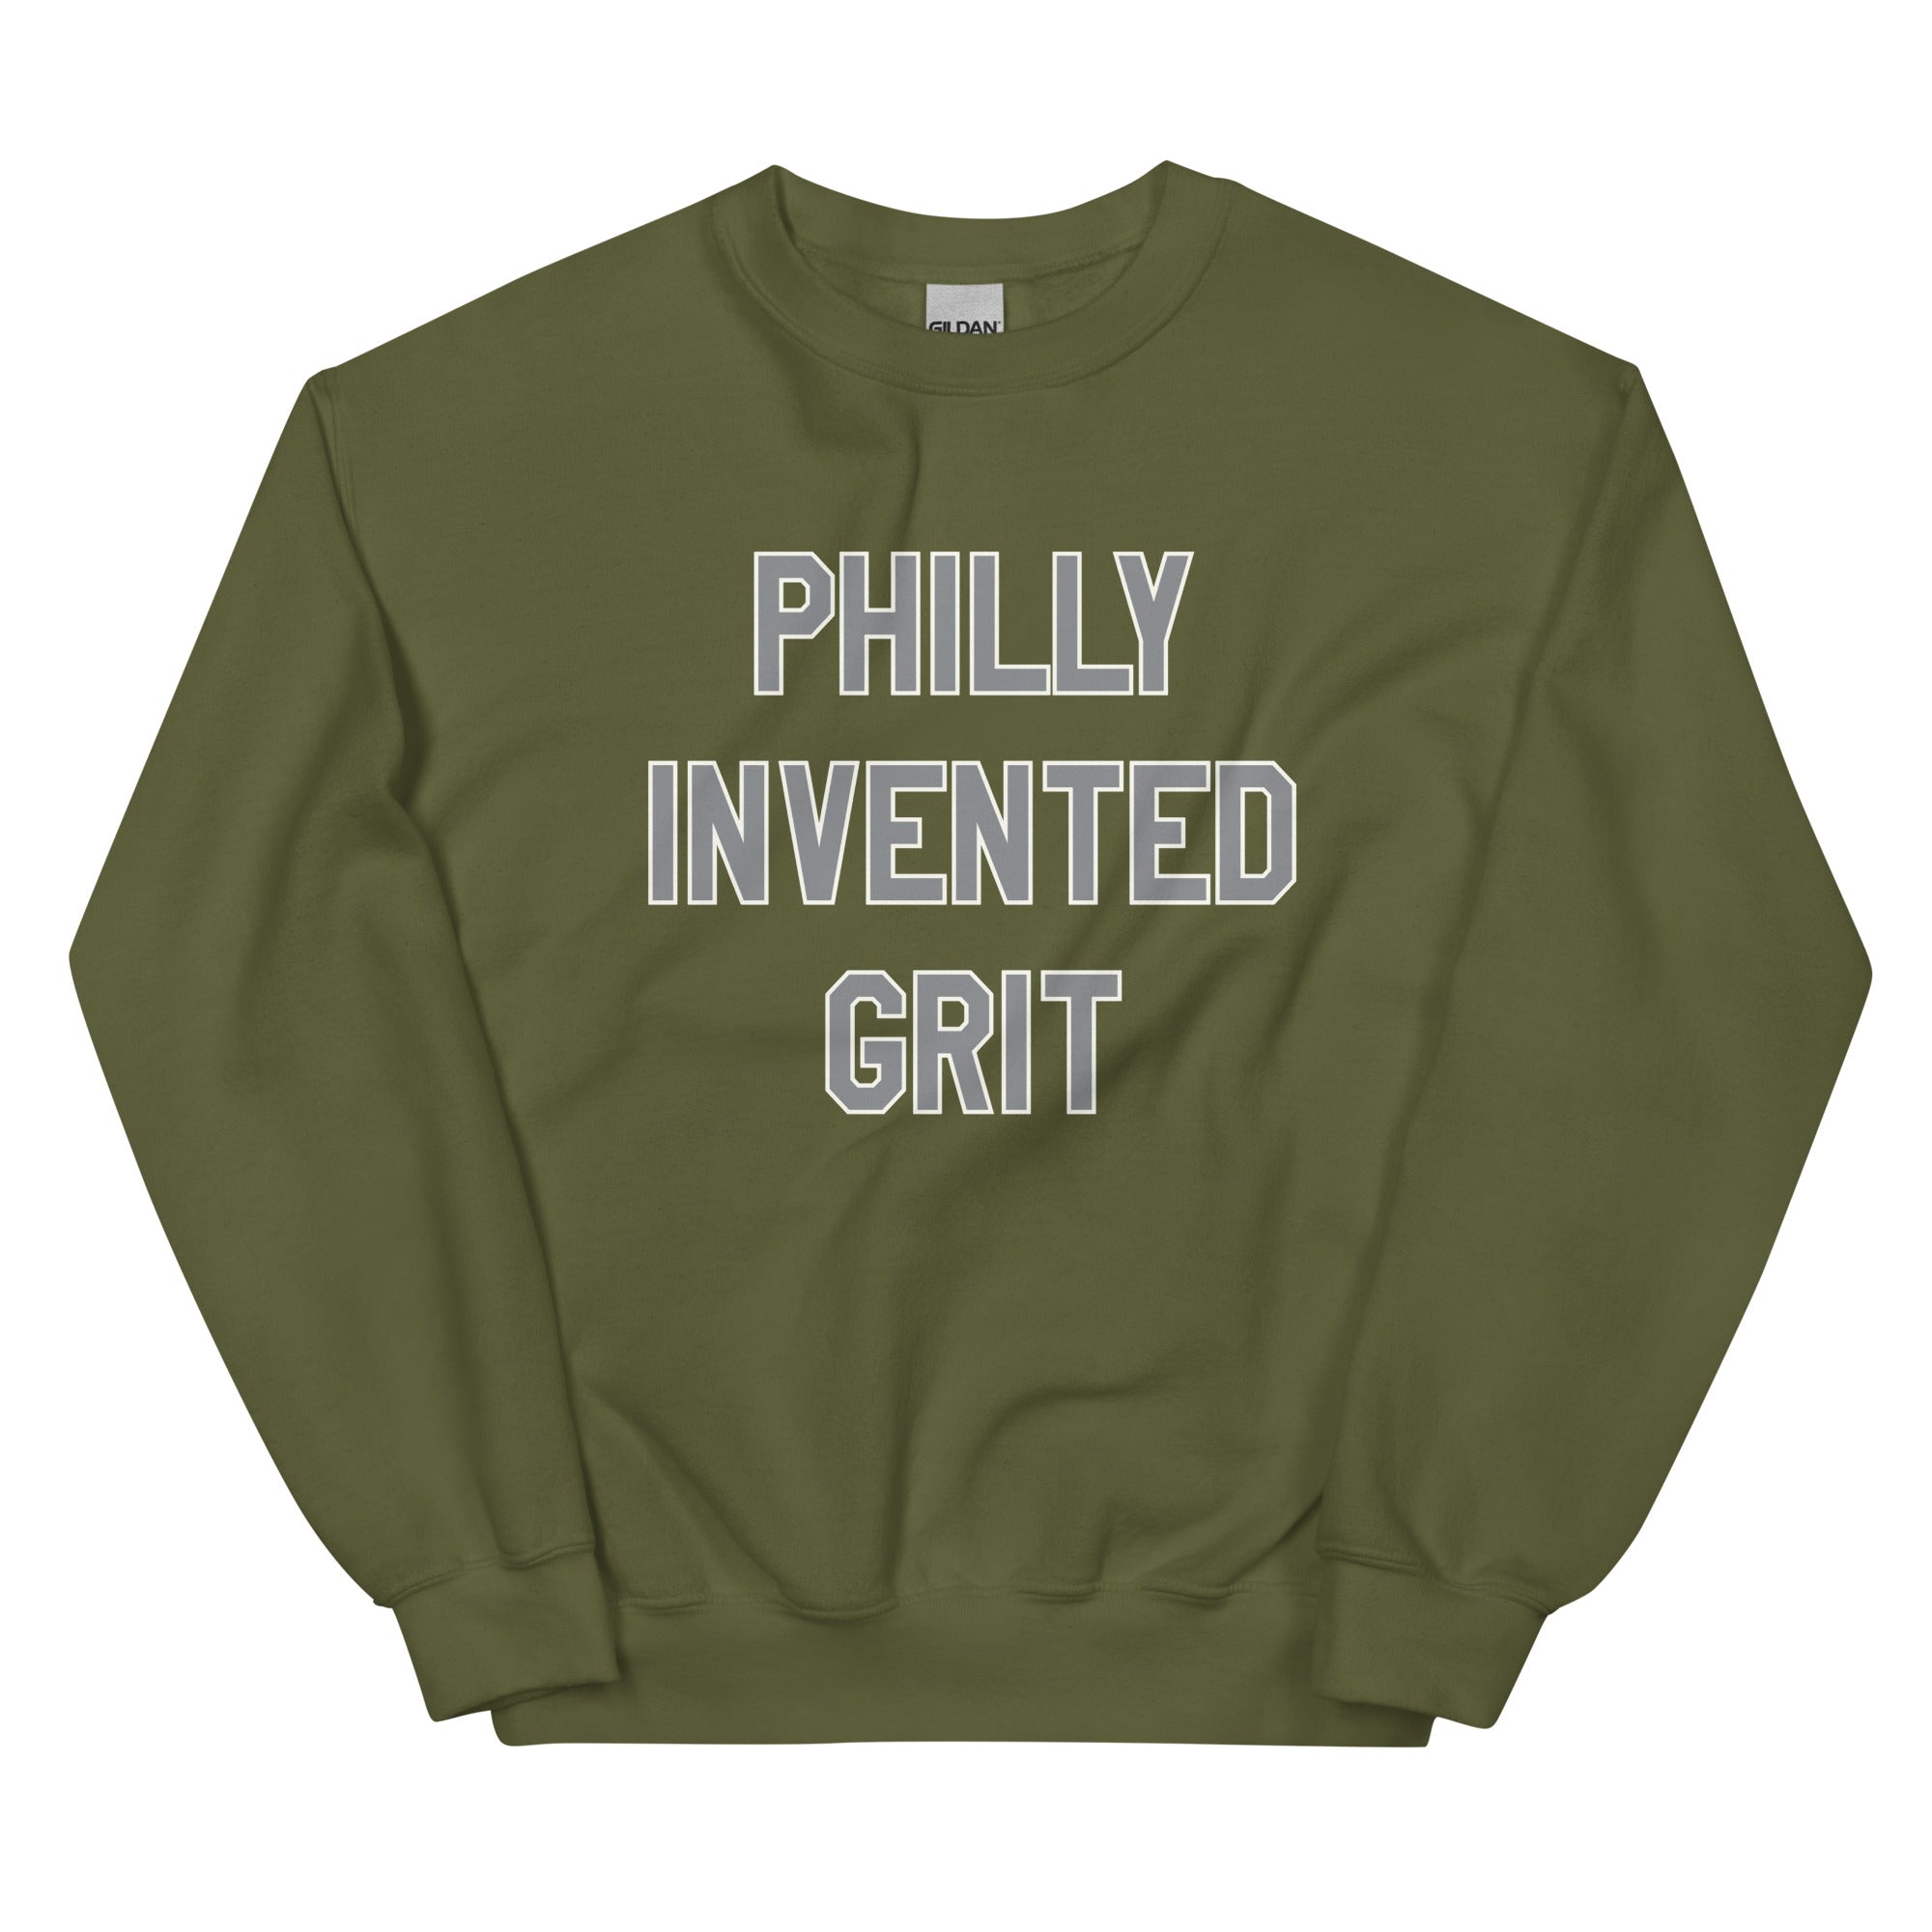 Philadelphia Flyers Philly invented grit green sweatshirt Phillygoat